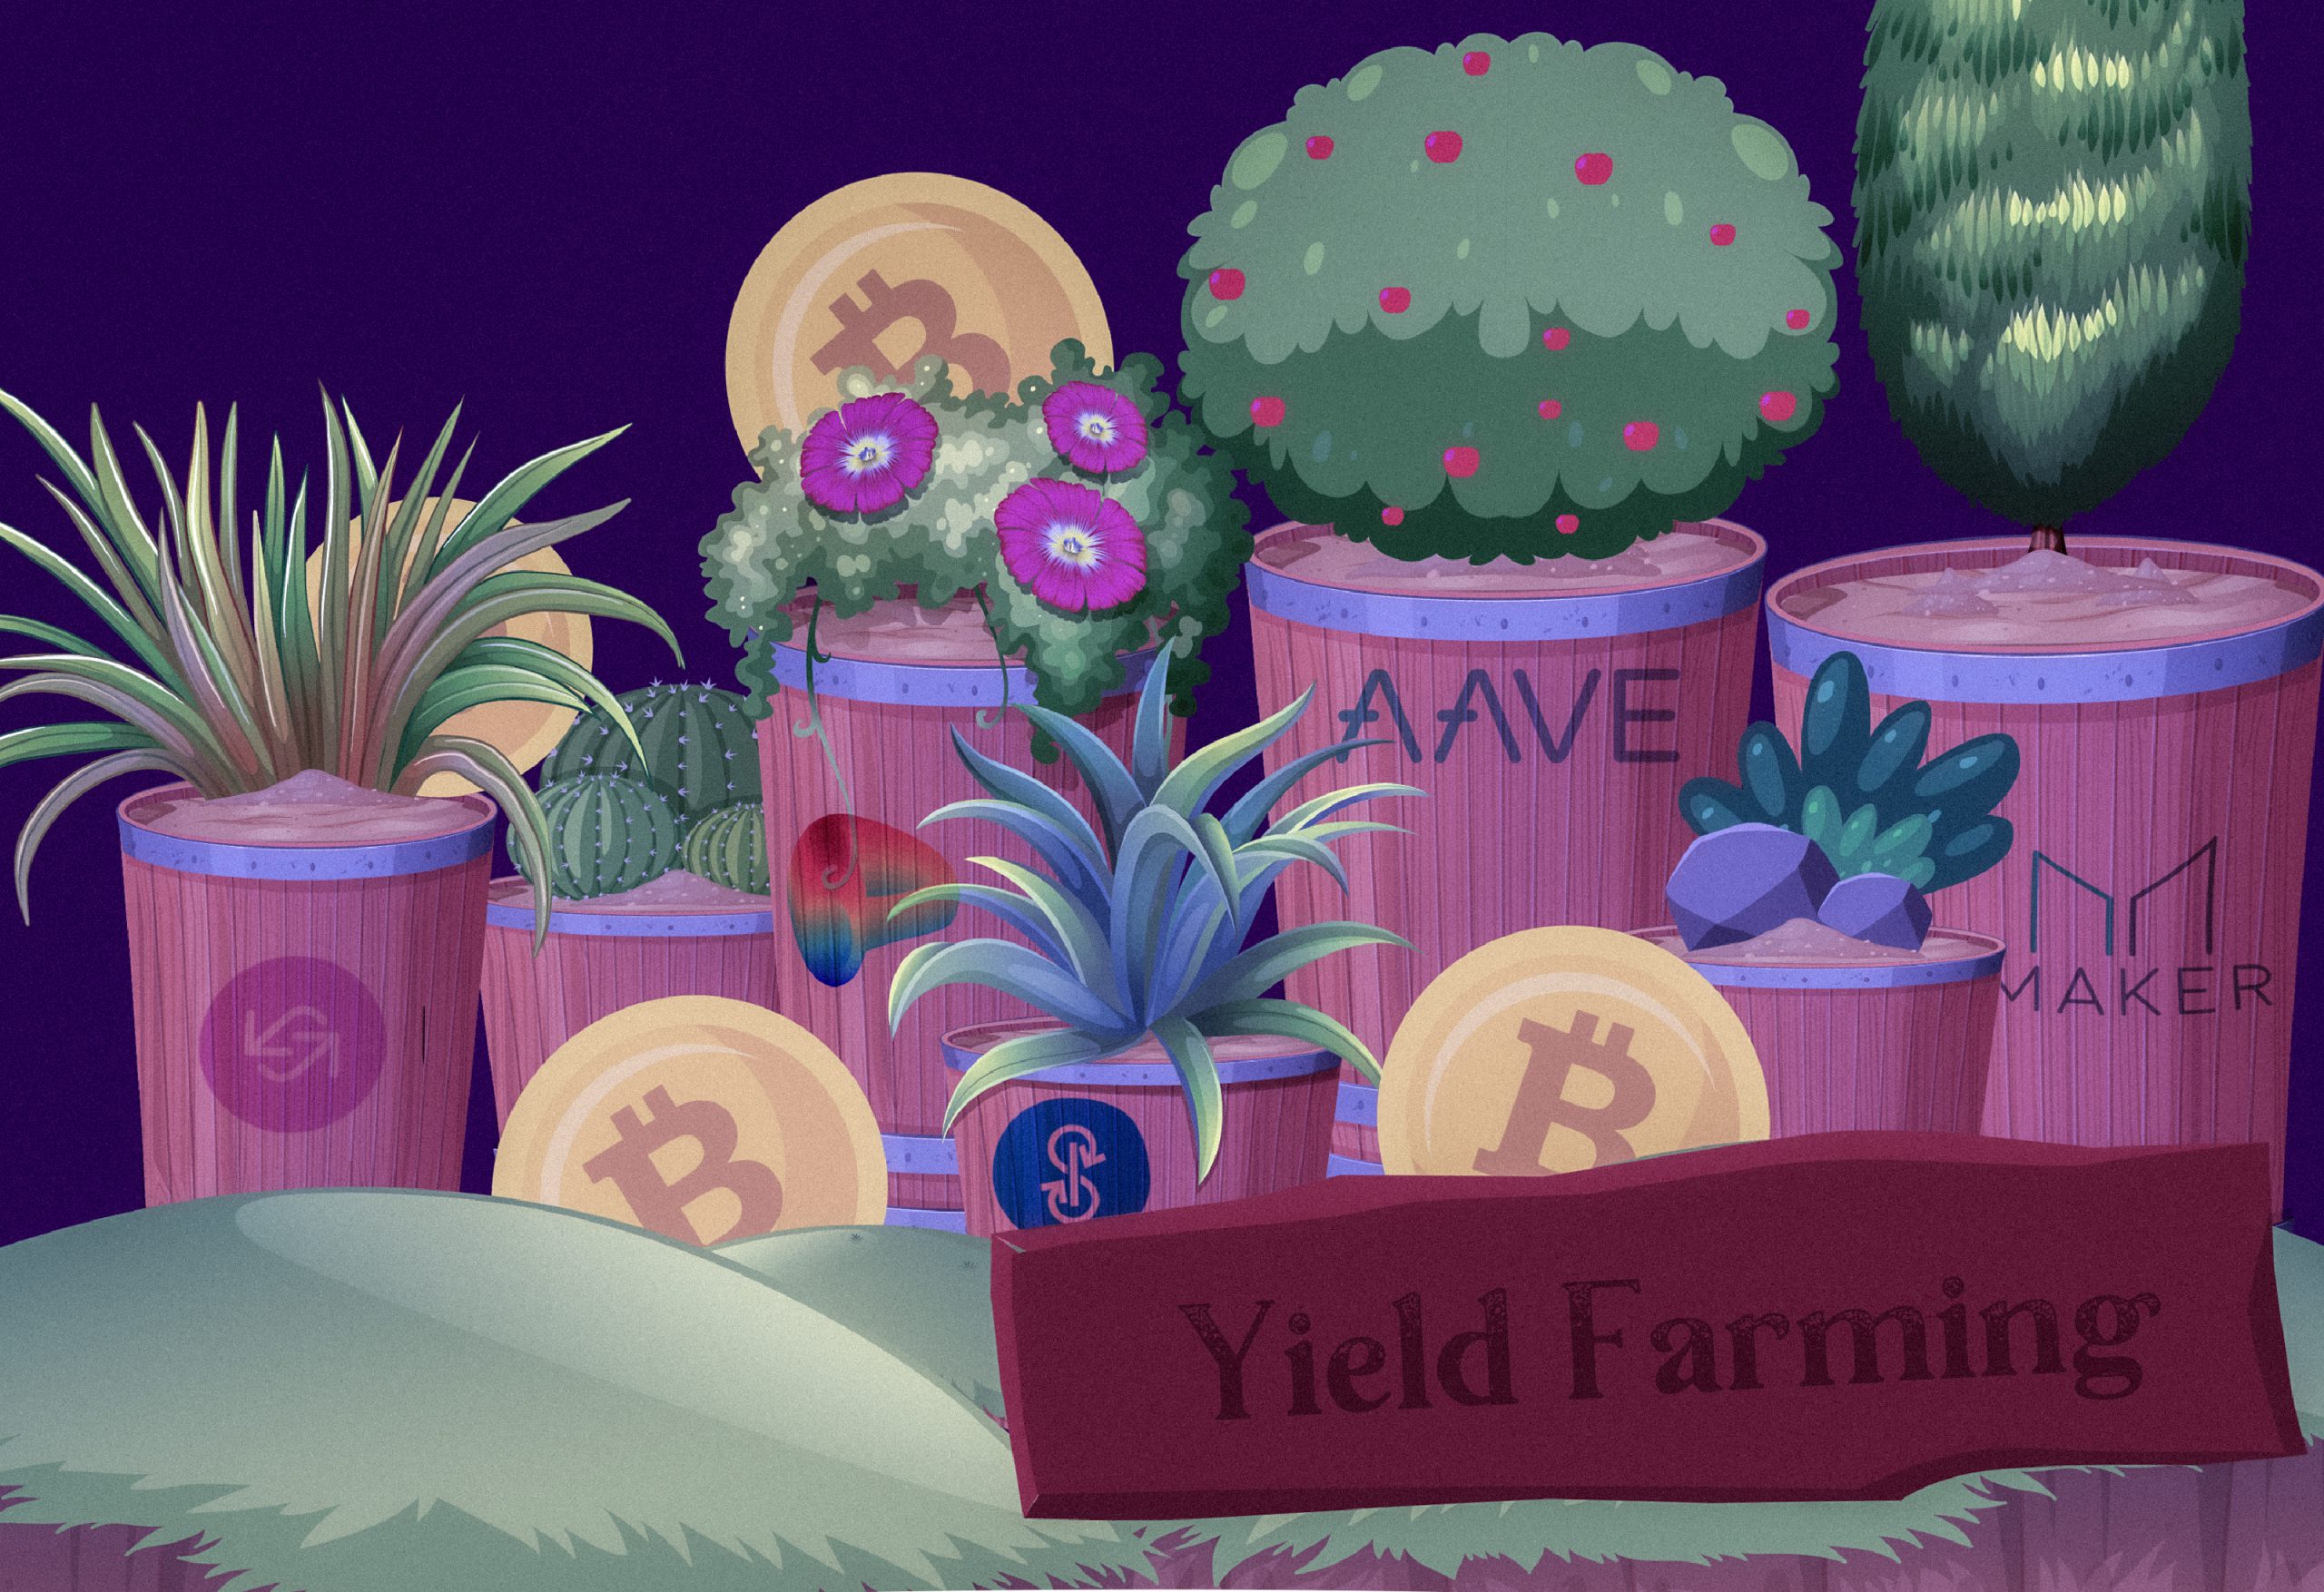 What is Yield Farming of cryptocurrencies?